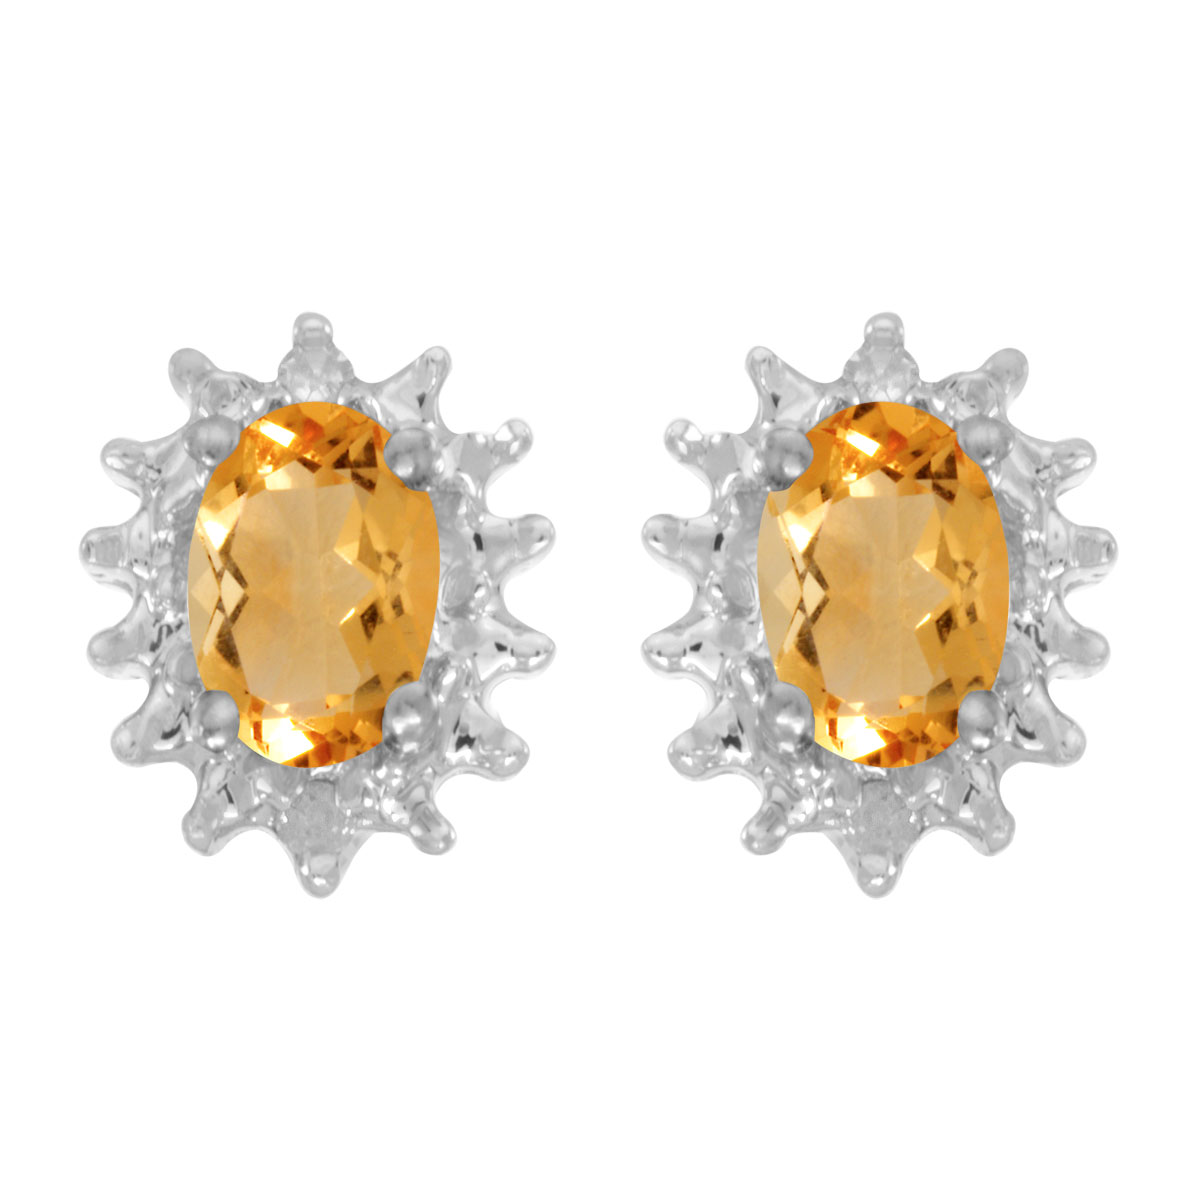 These 14k white gold oval citrine and diamond earrings feature 6x4 mm genuine natural citrines wi...